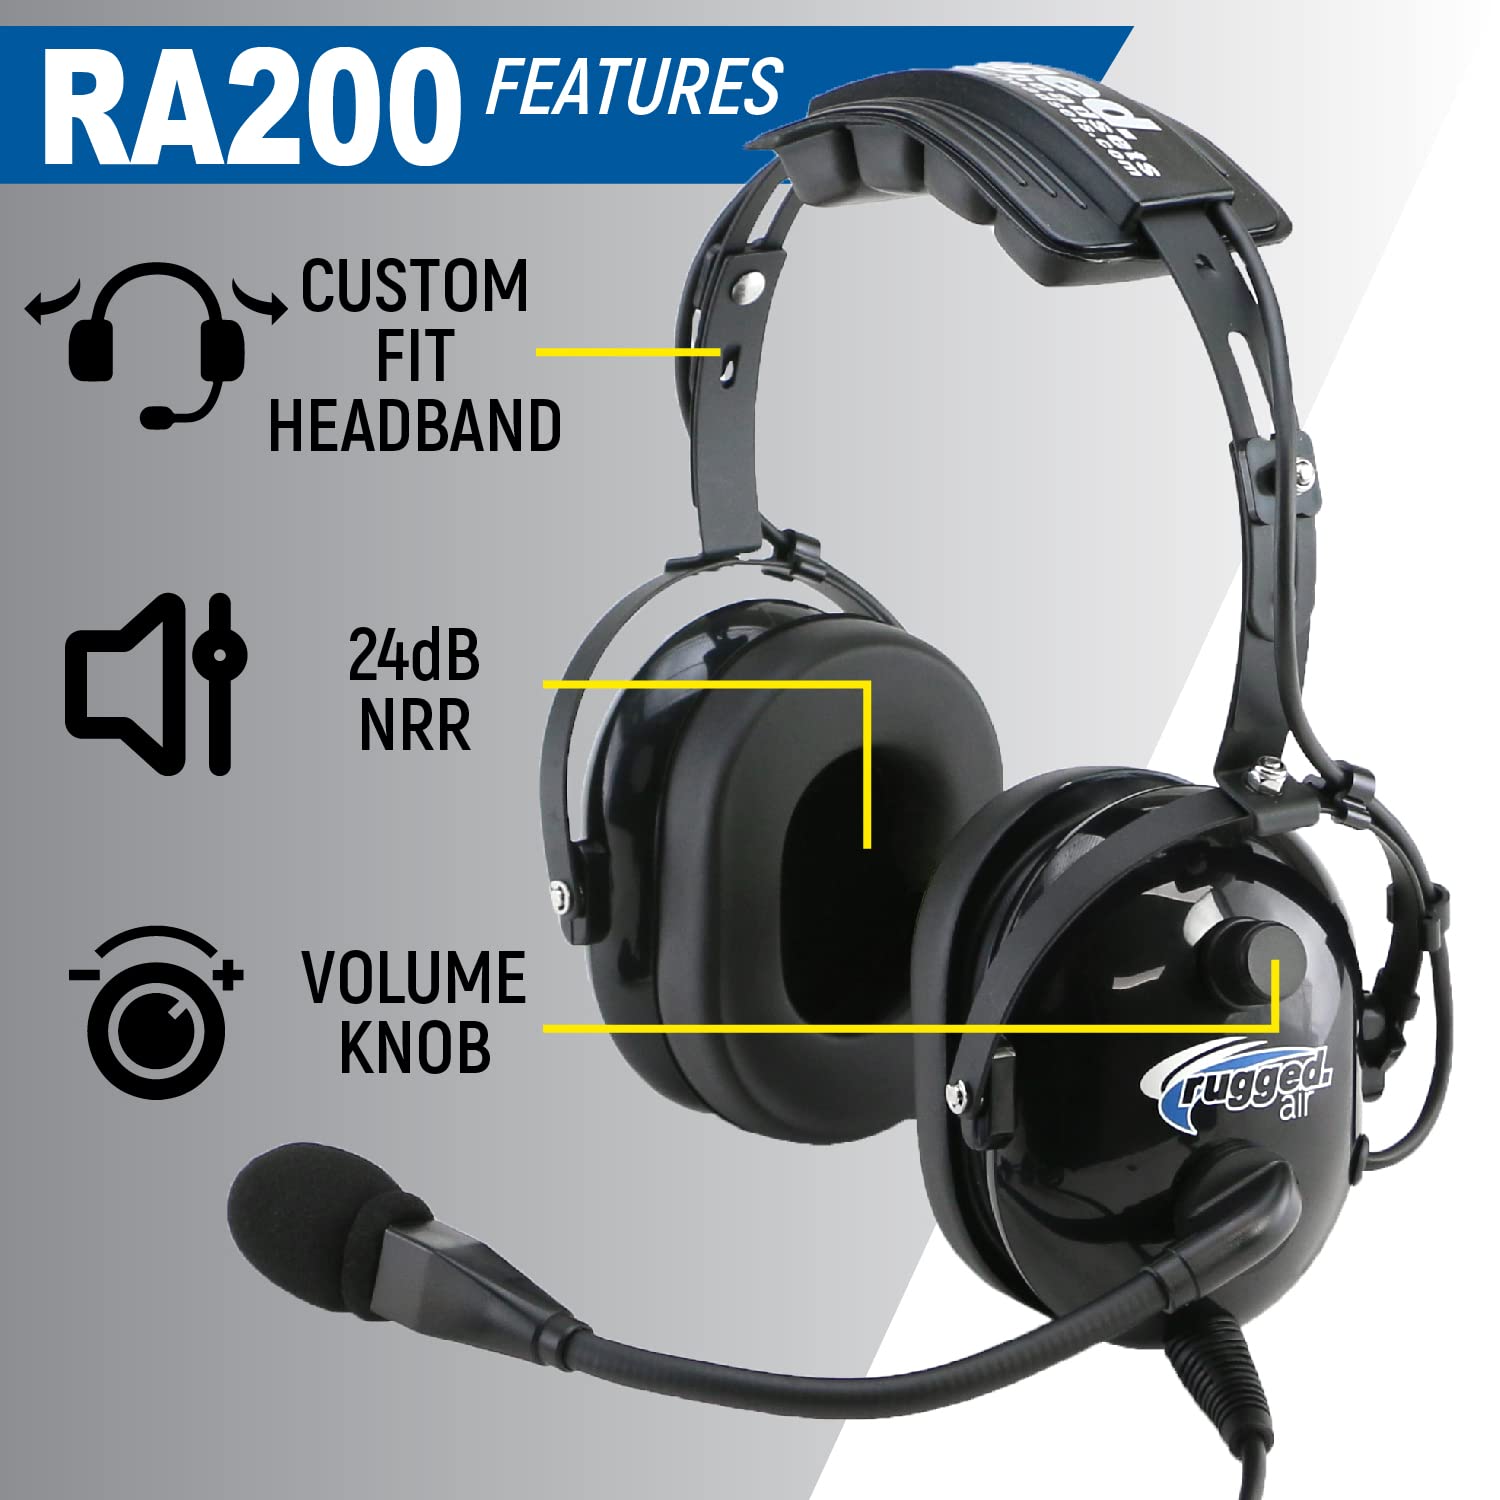 Rugged 2 Pack General Aviation Student Pilot Headsets for Flying Airplanes - Features Noise Reduction GA Dual Plugs Adjustable Headband and Free Headset Bag